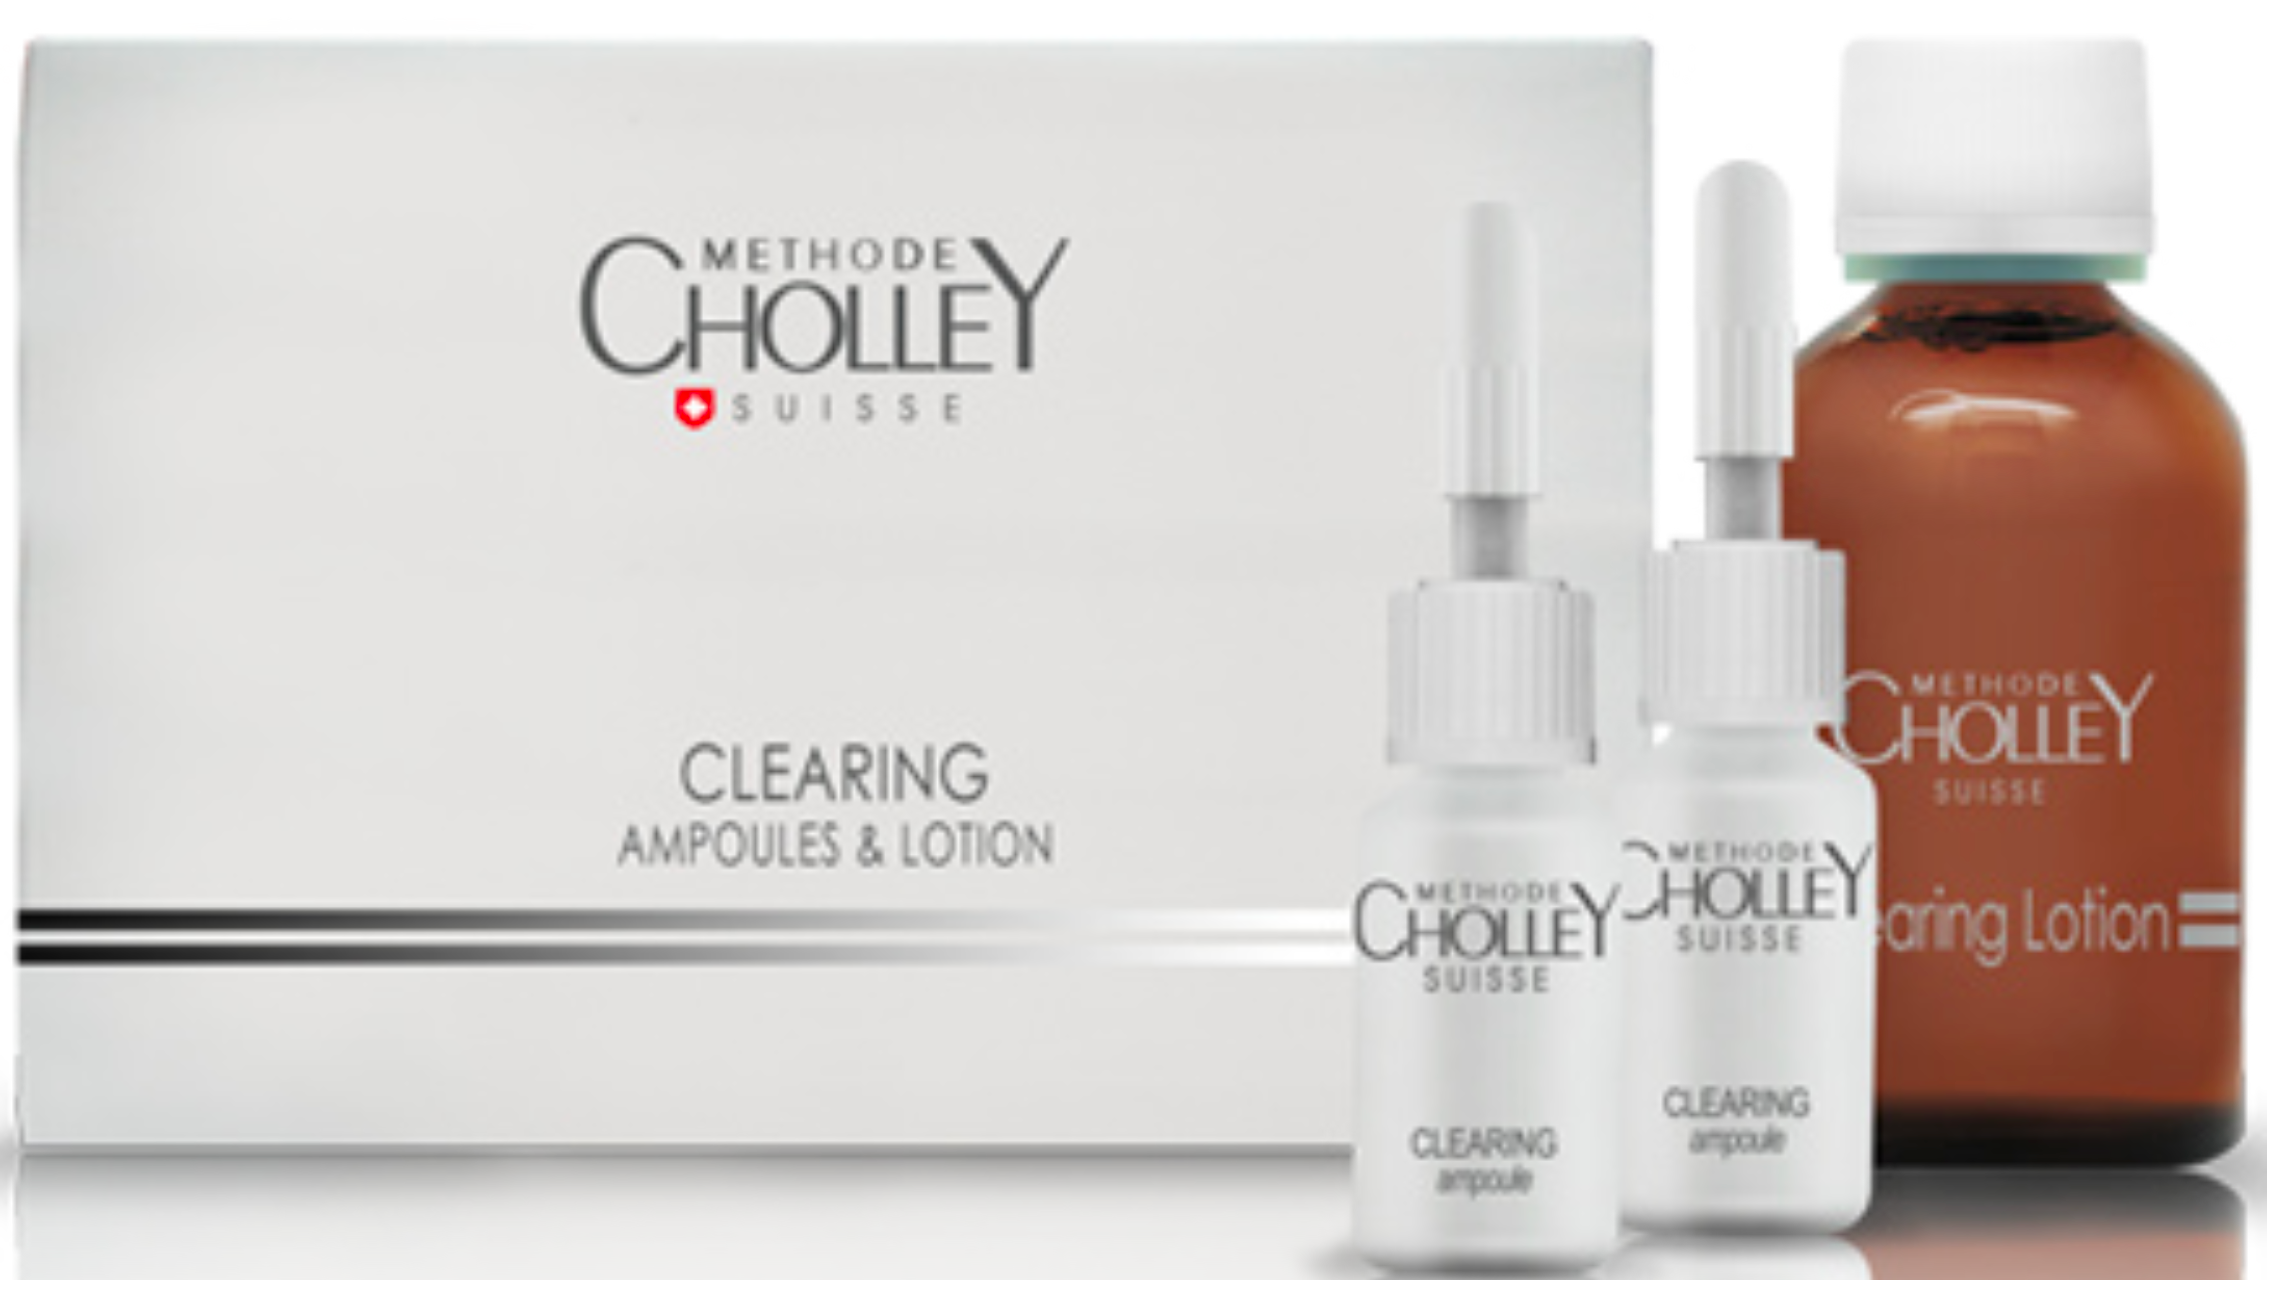 Methode Cholley 晶瑩亮白去斑精華素 CHOLLEY® CLEARING AMPOULES & LOTION (6pcs + 30ml)